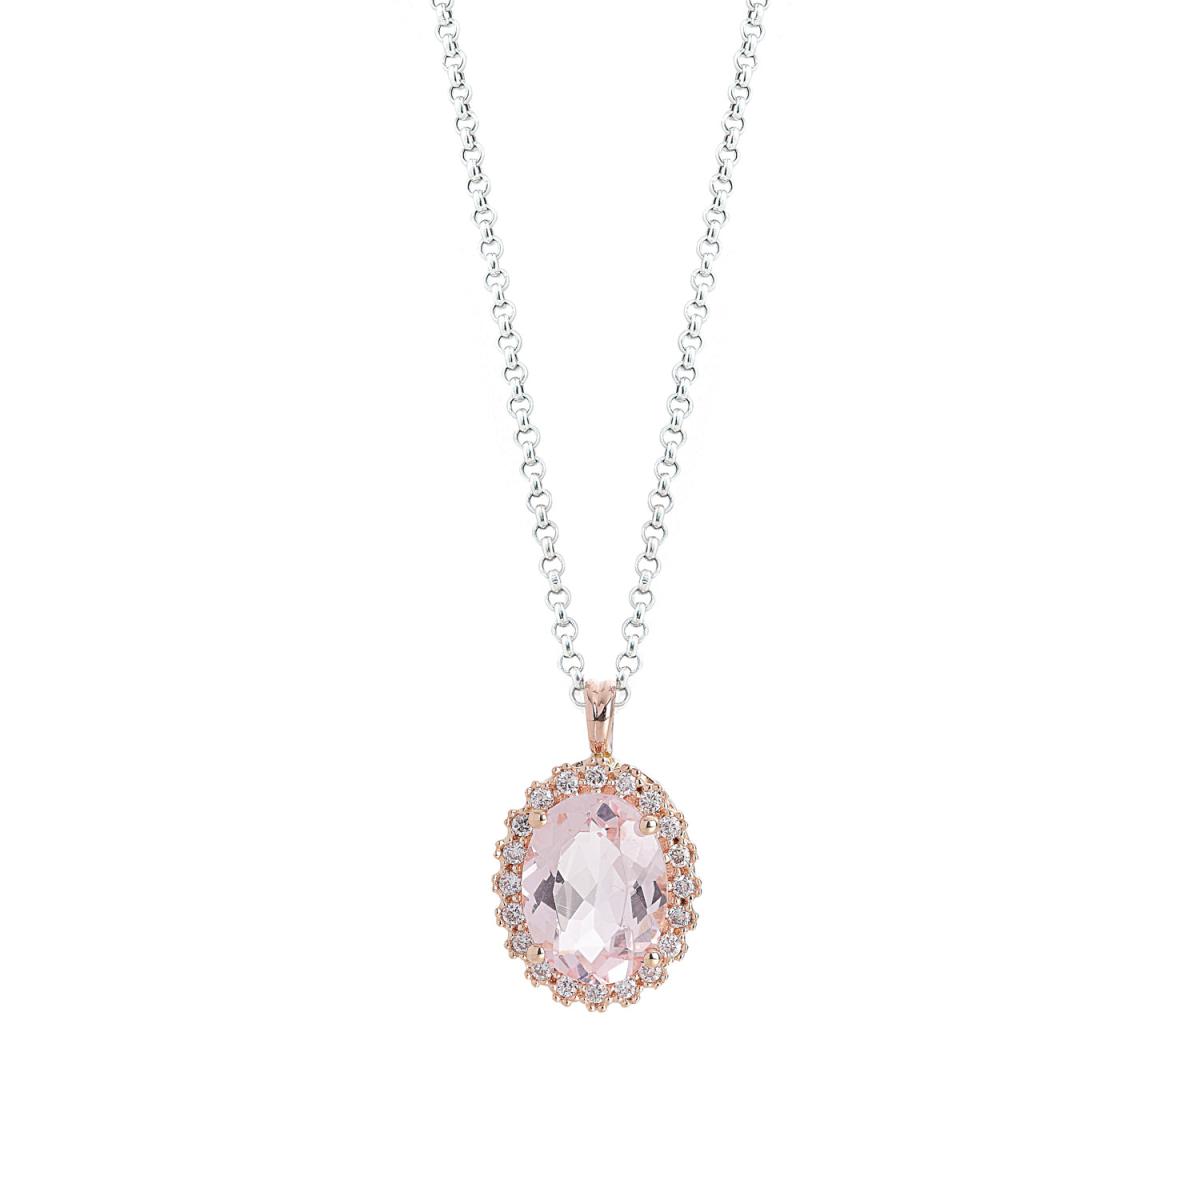 Gold necklace with morganite and diamonds - CD481/MO-LH